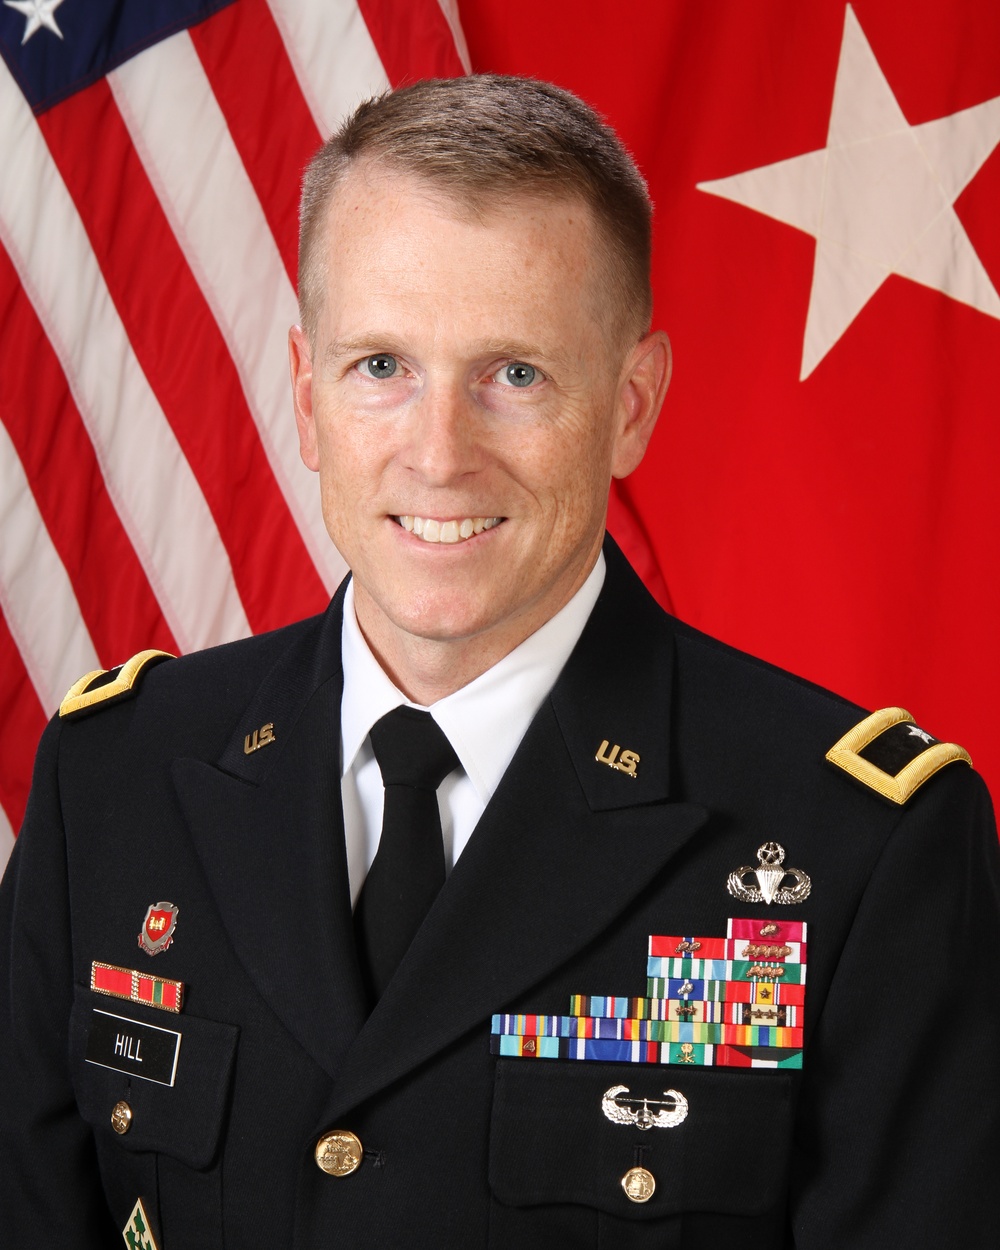 Brig. Gen. David C. Hill appointed to Mississippi River Commission